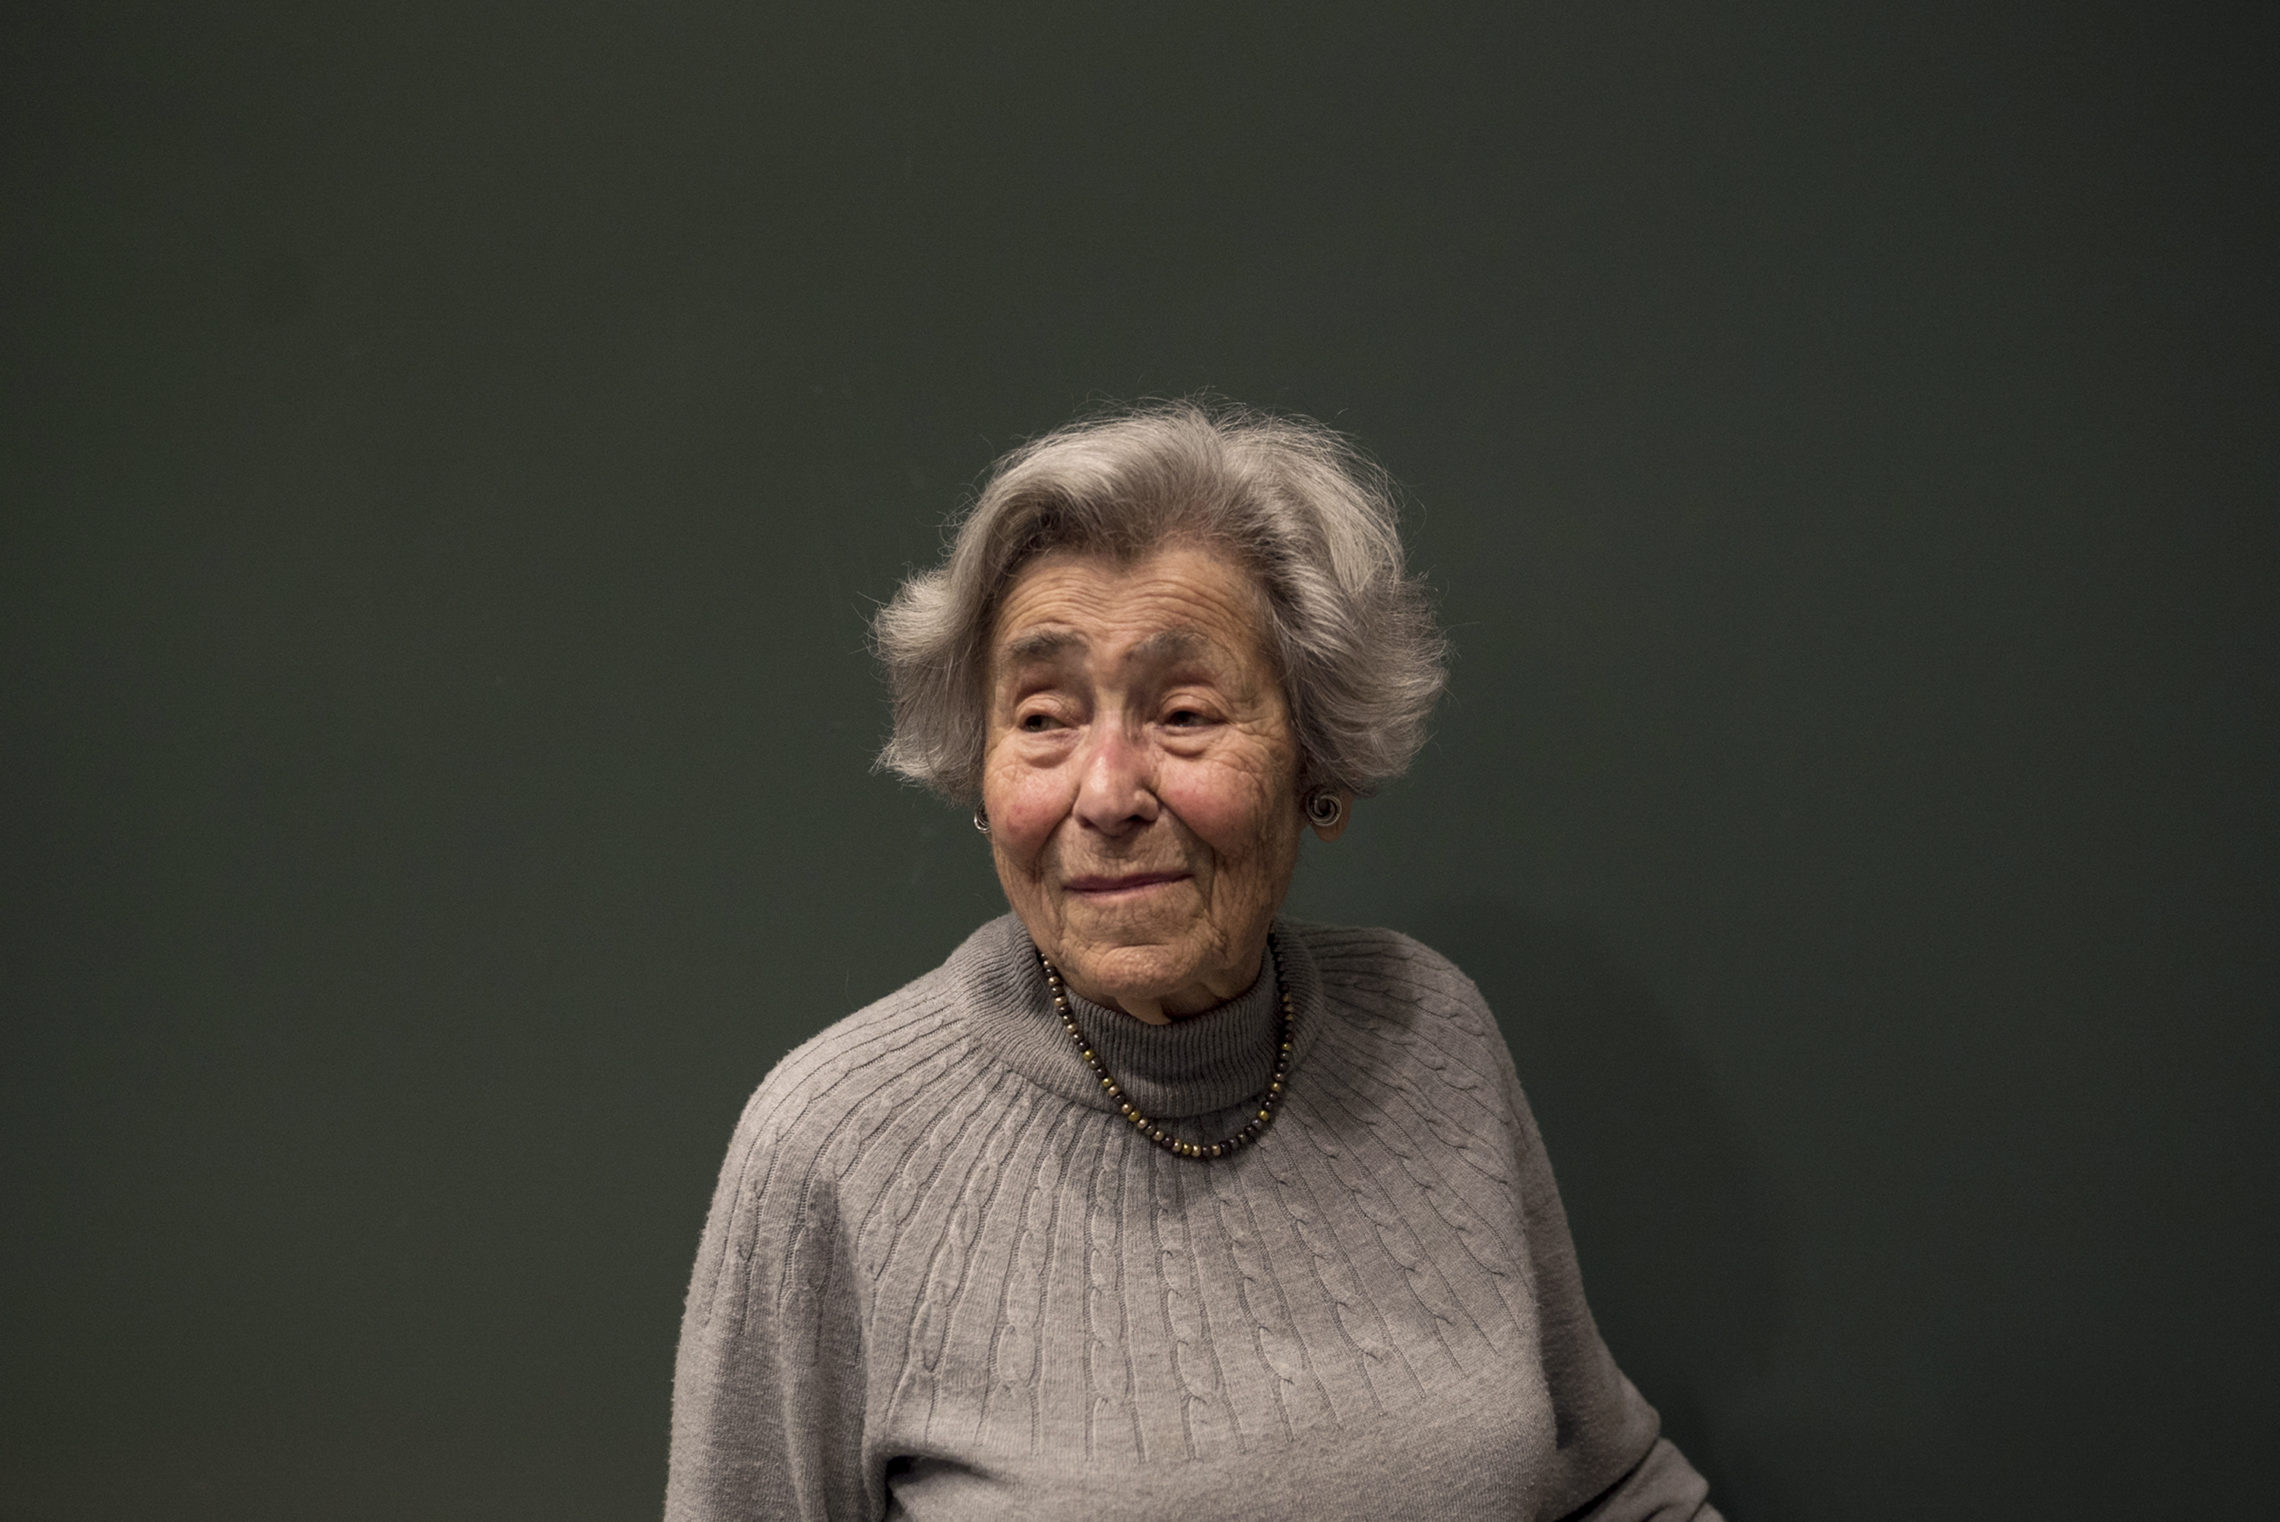 Margit Meissner, a 96-year-old Holocaust survivor and volunteer at the museum, says she's making up for years of ignorance by sharing what she has learned. CREDIT: ESLAH ATTAR